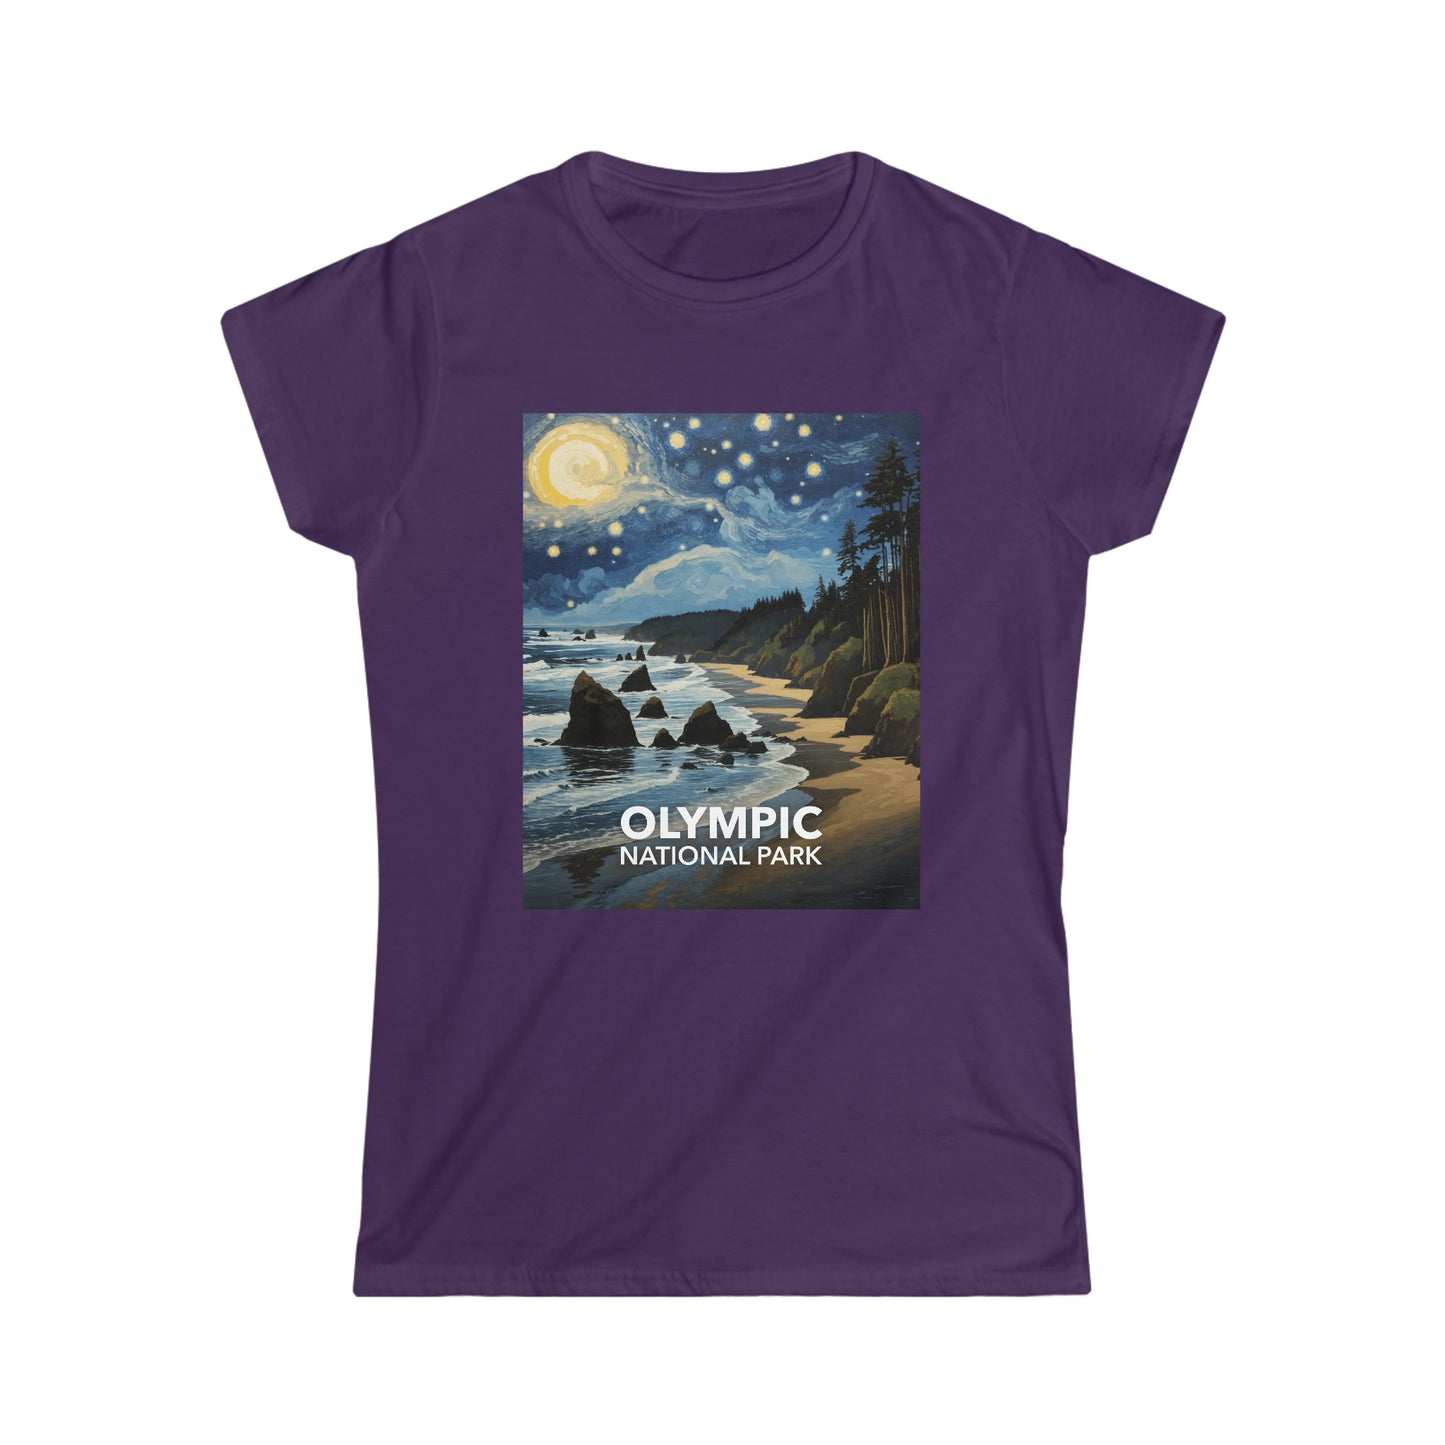 Olympic National Park T-Shirt - Women's Starry Night